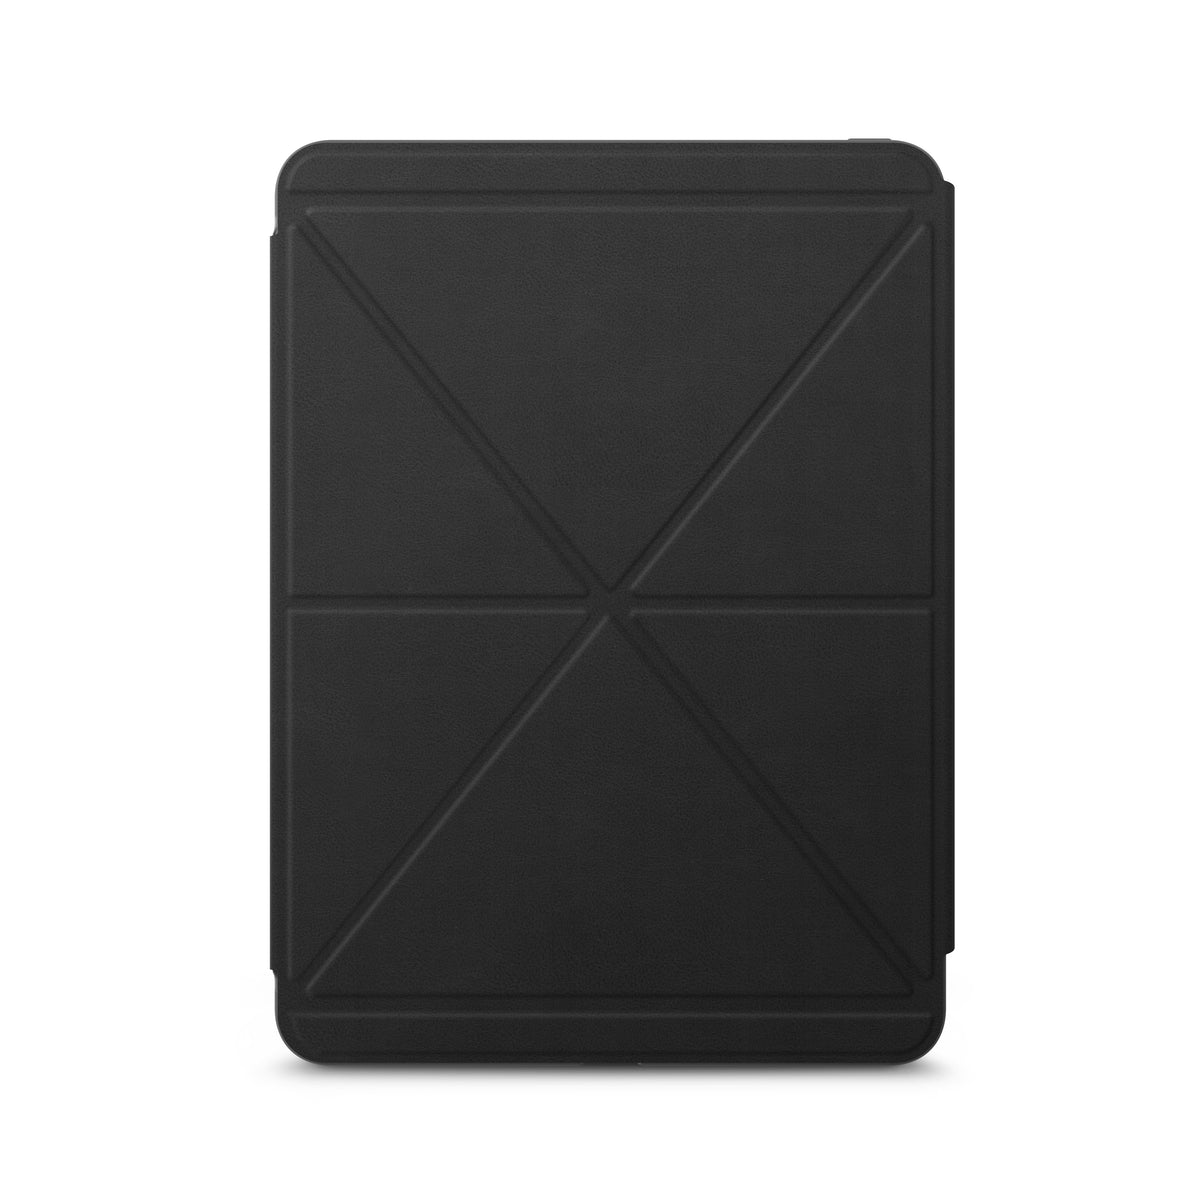 MOSHI VersaCover for iPad Pro 11-inch (1st/2nd Gen) - Charcoal Black